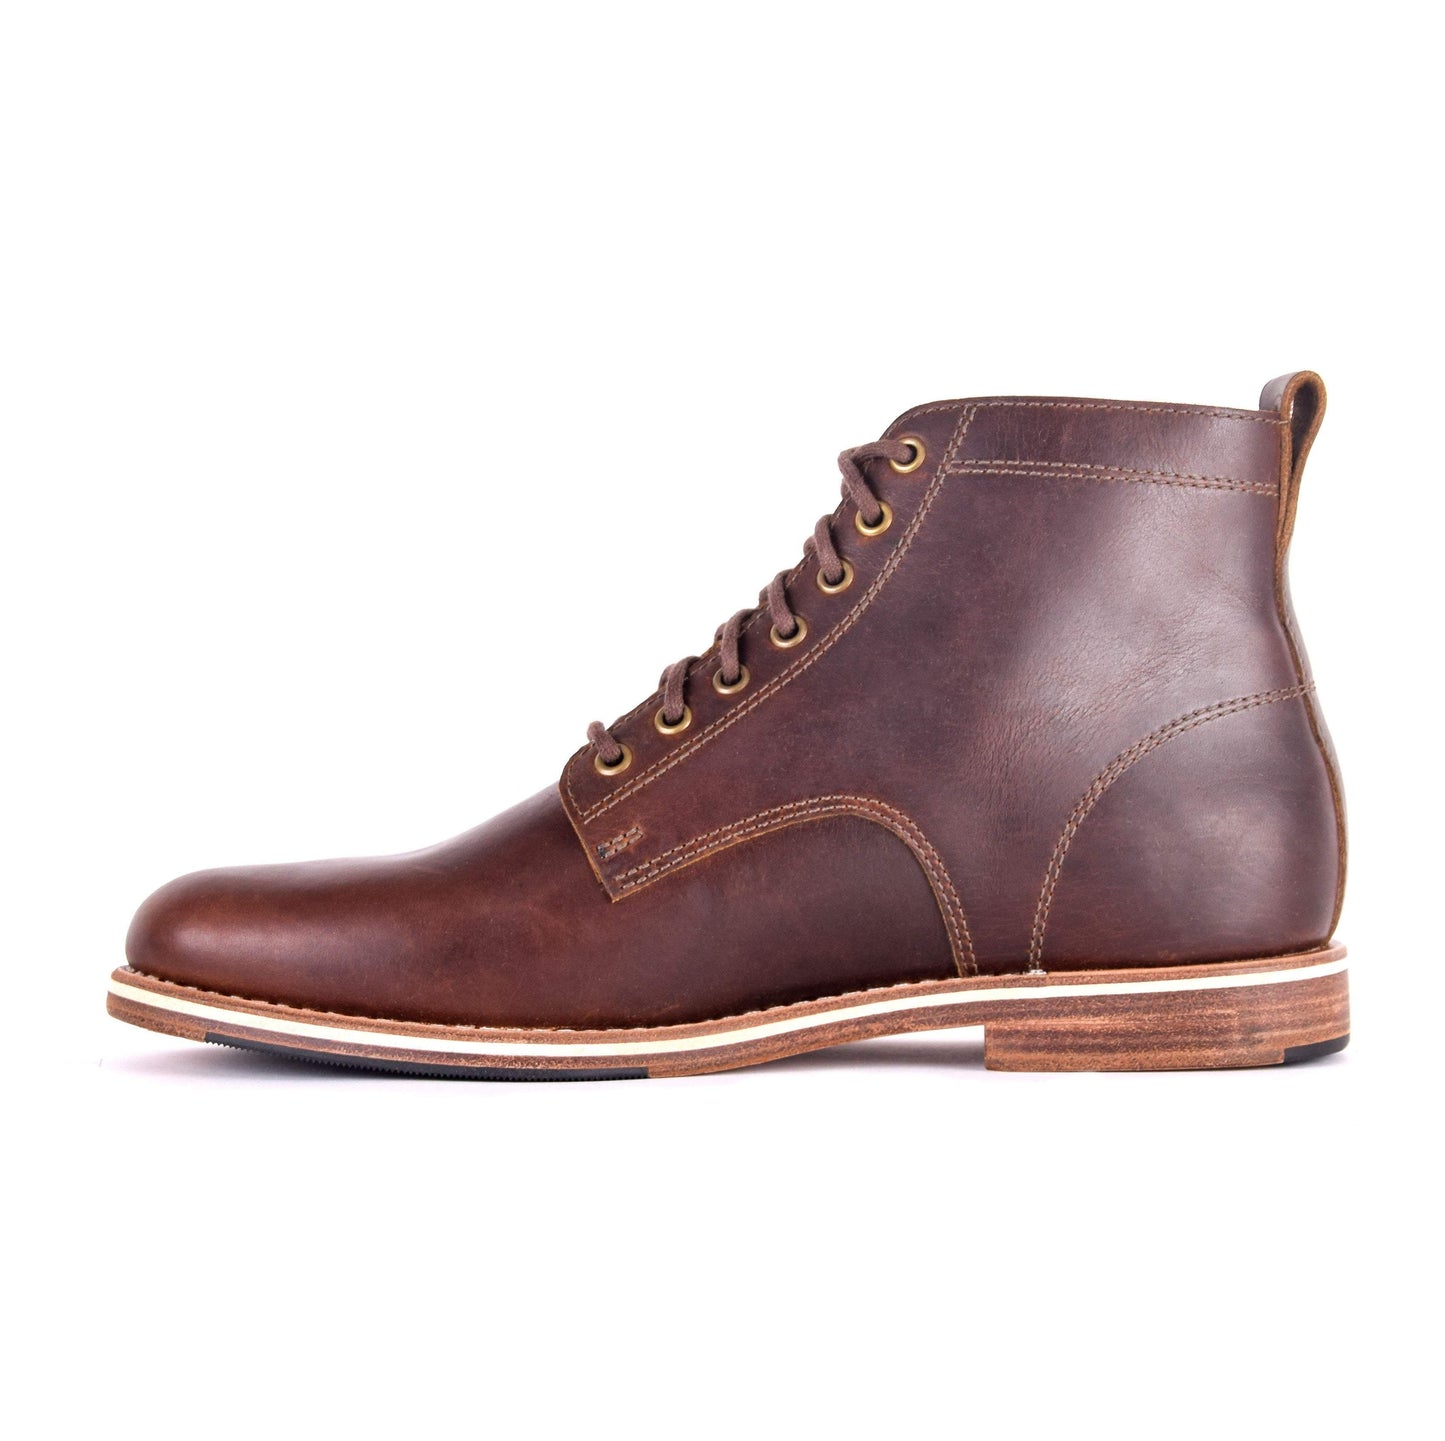 HELM Boots The Zind Brown